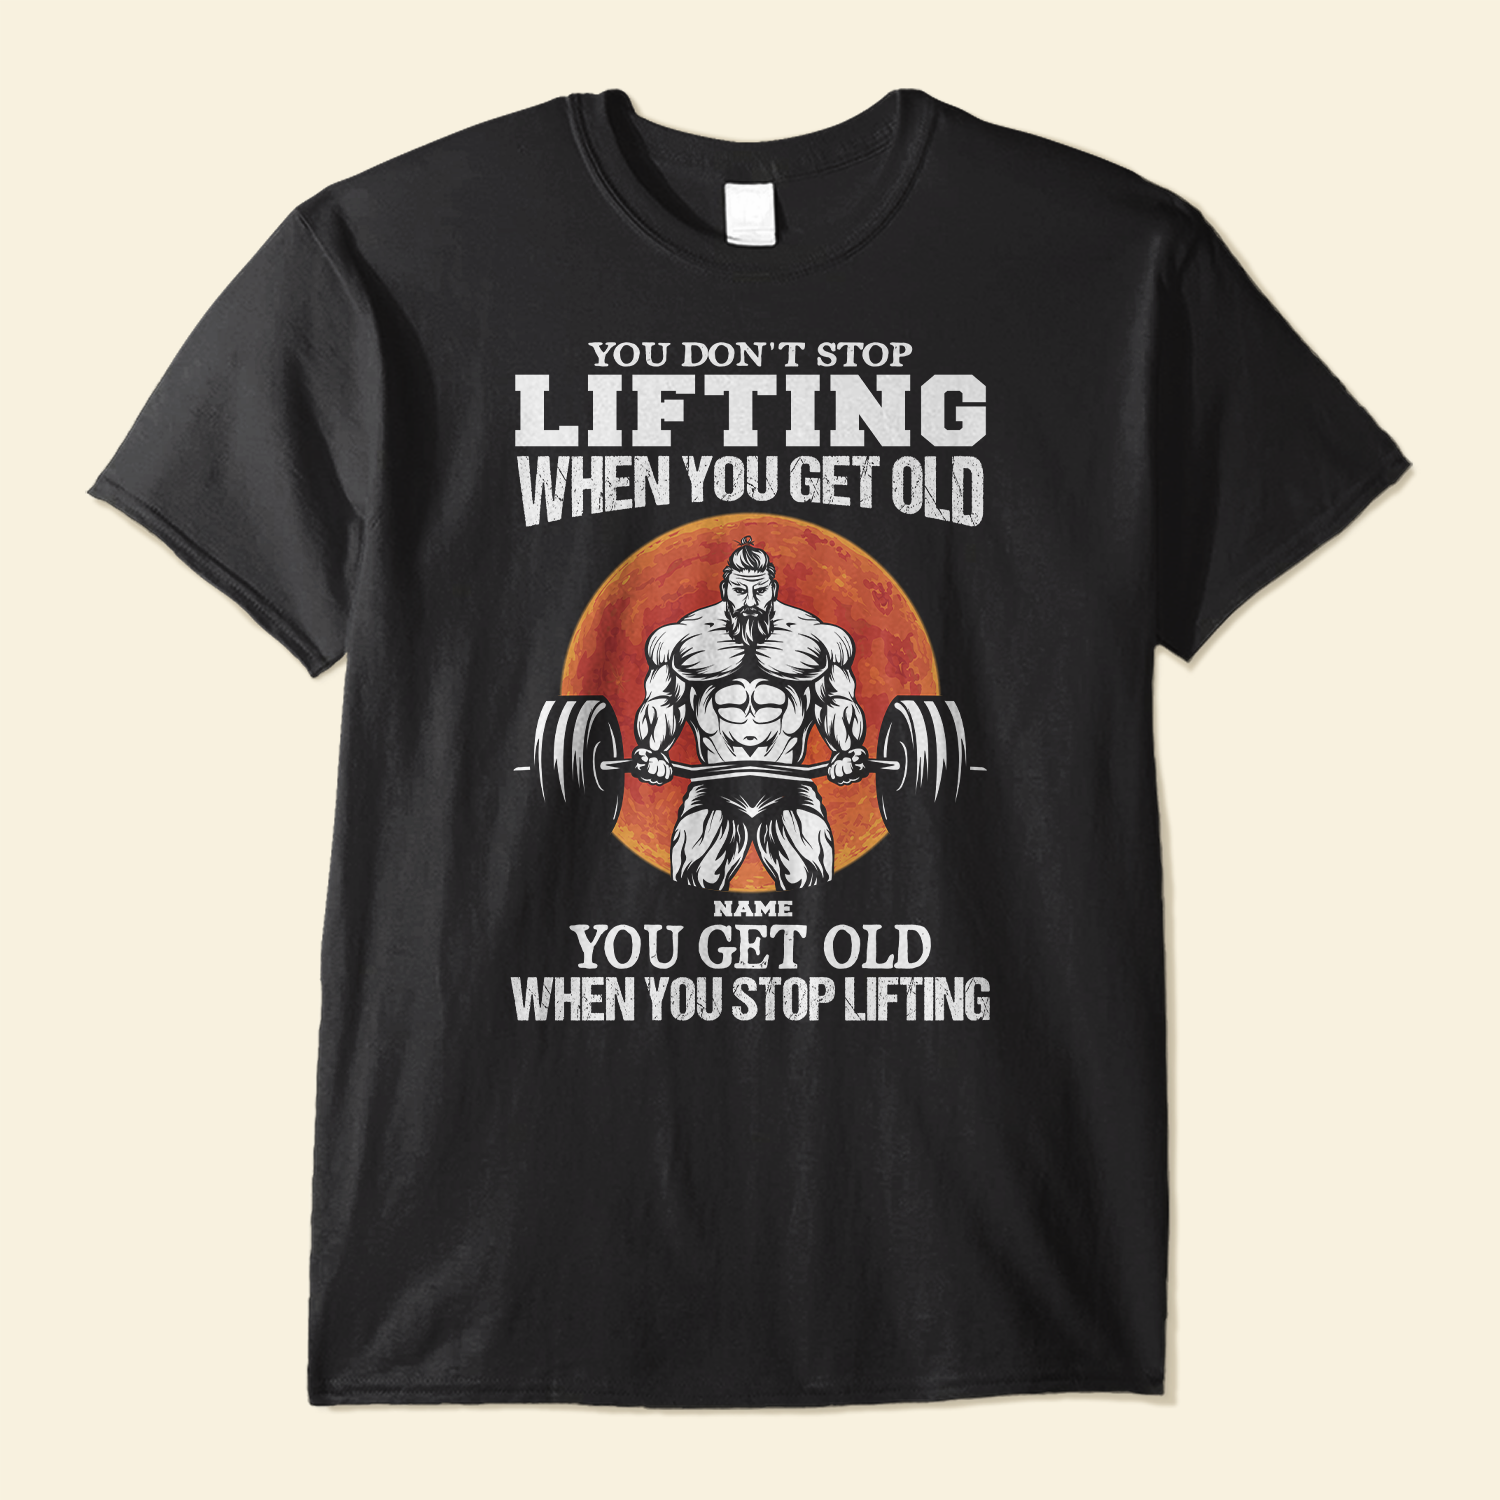 You Don't Stop Lifting - Personalized Shirt - Birthday Gift For Gymer - Old Man Lifting